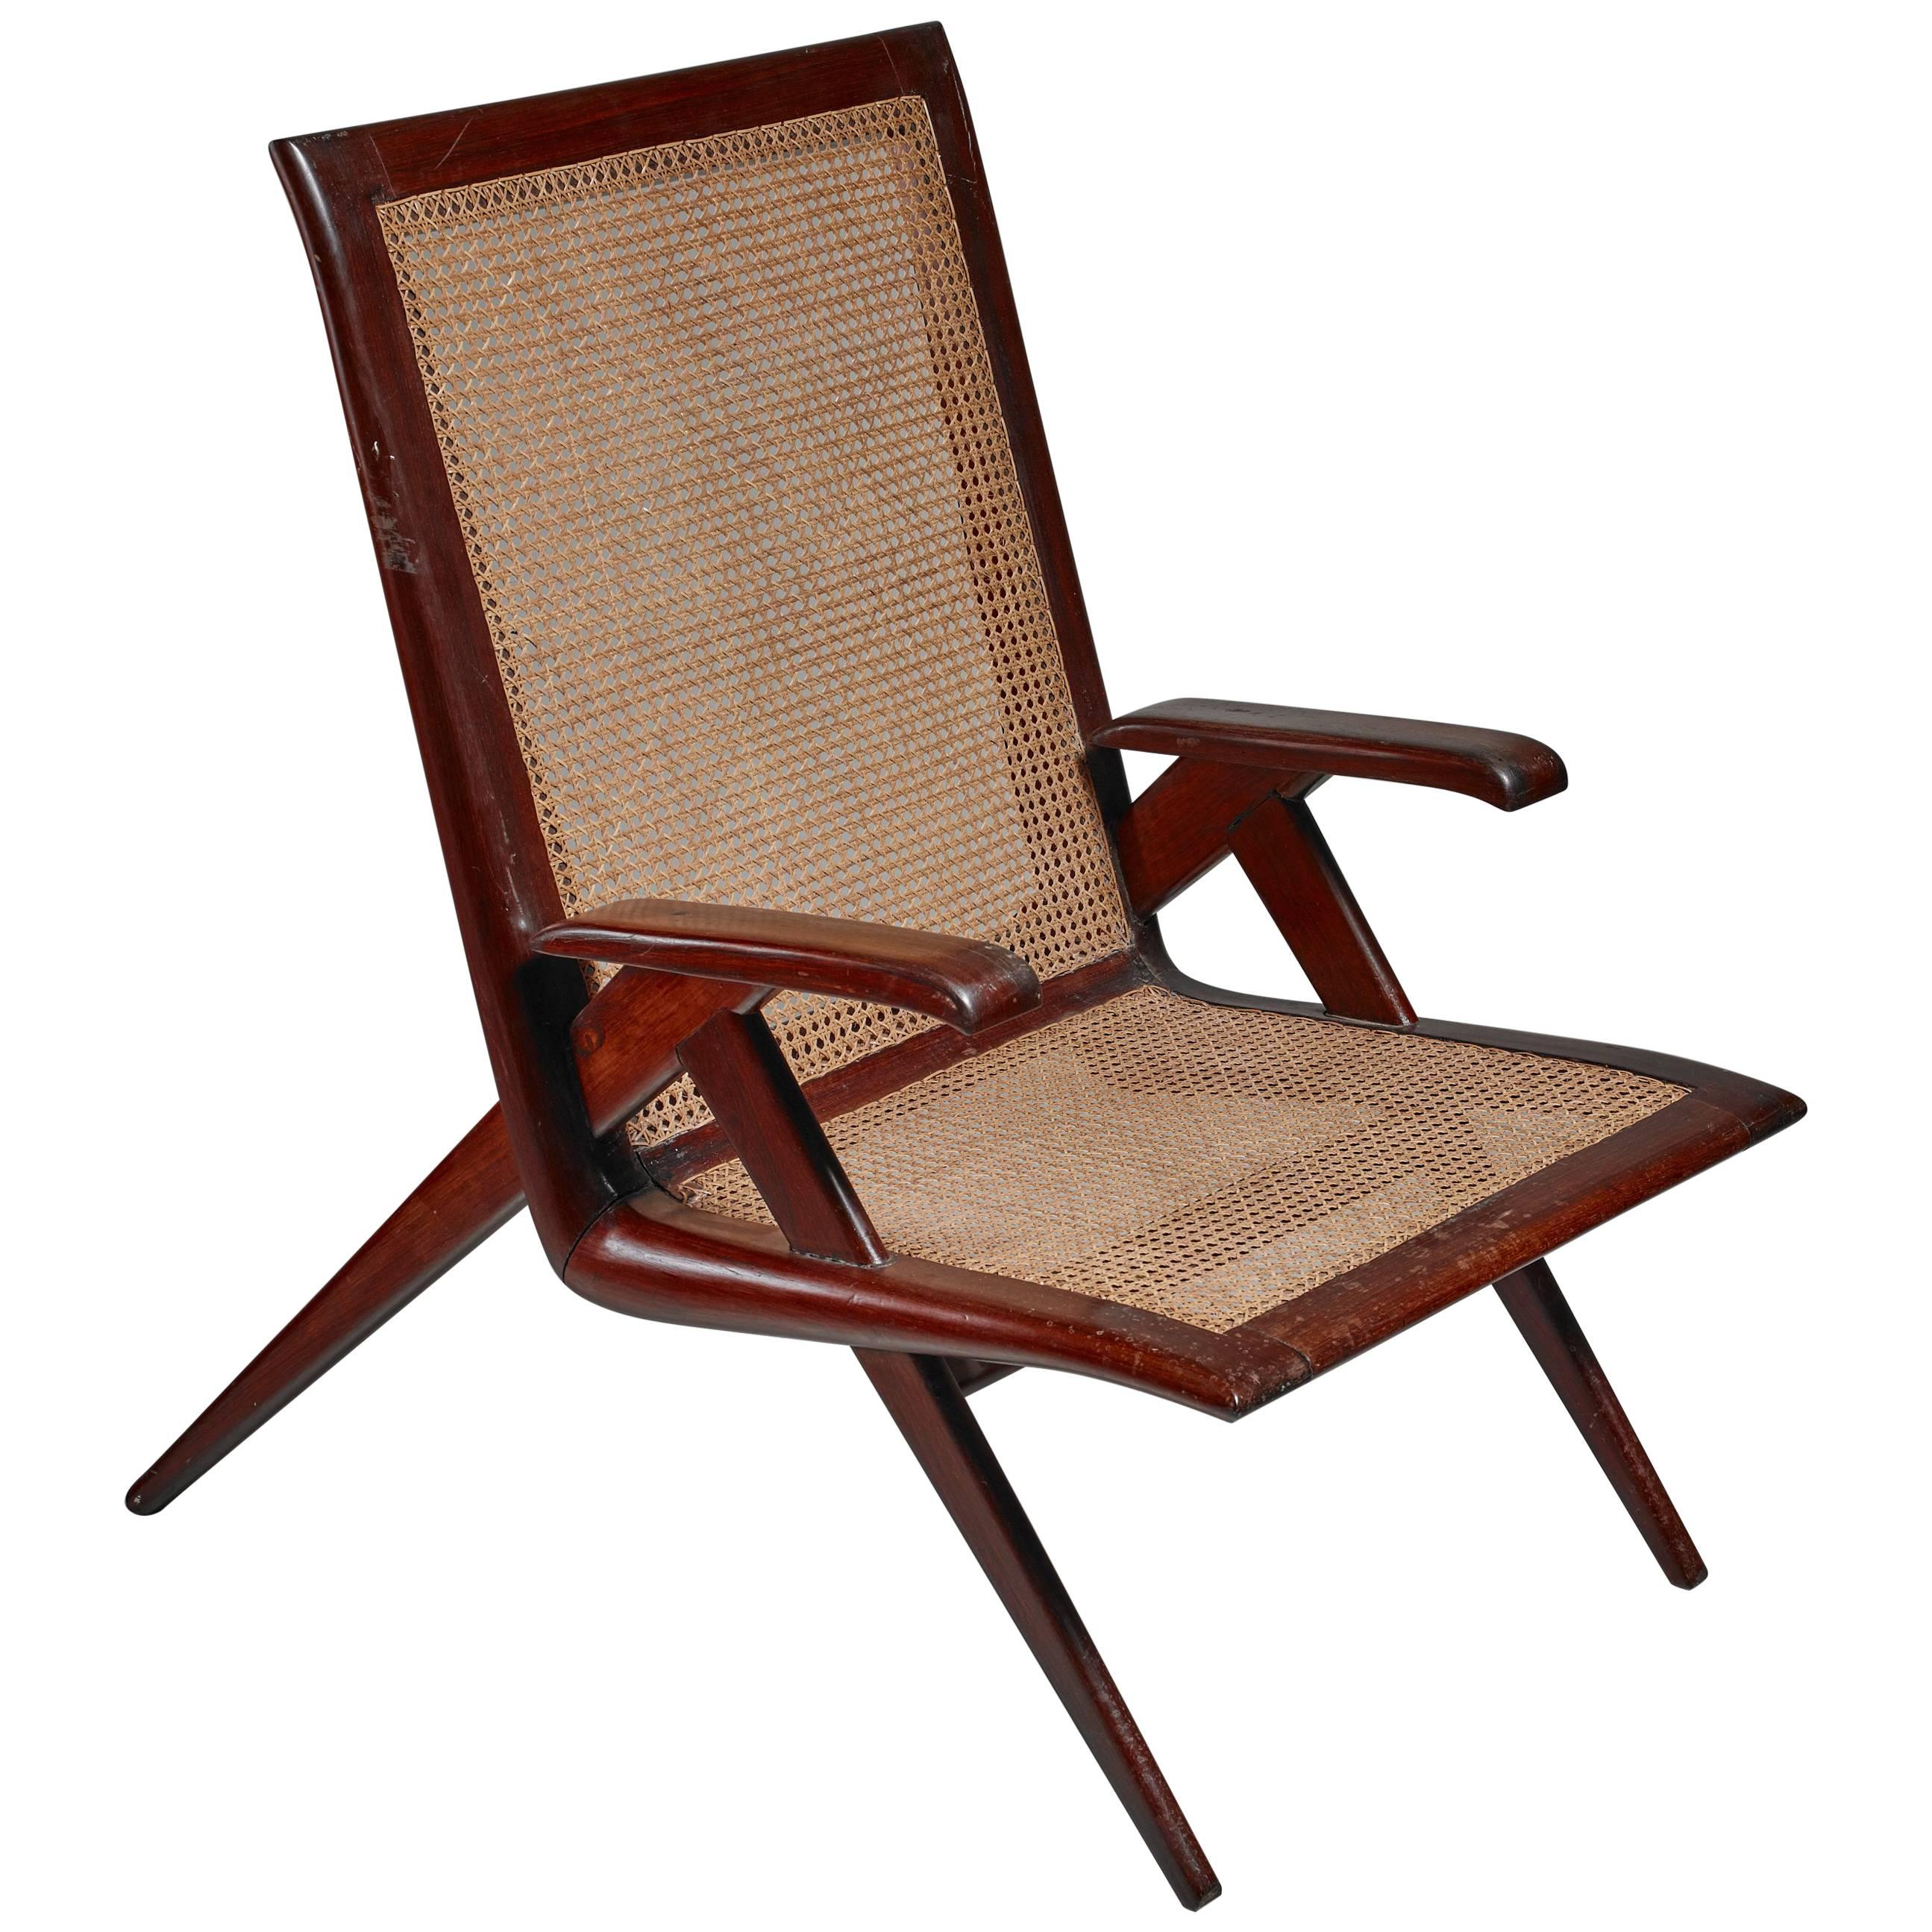 Brazilian Wooden Armchair with Woven Cane Seating, 1950s For Sale